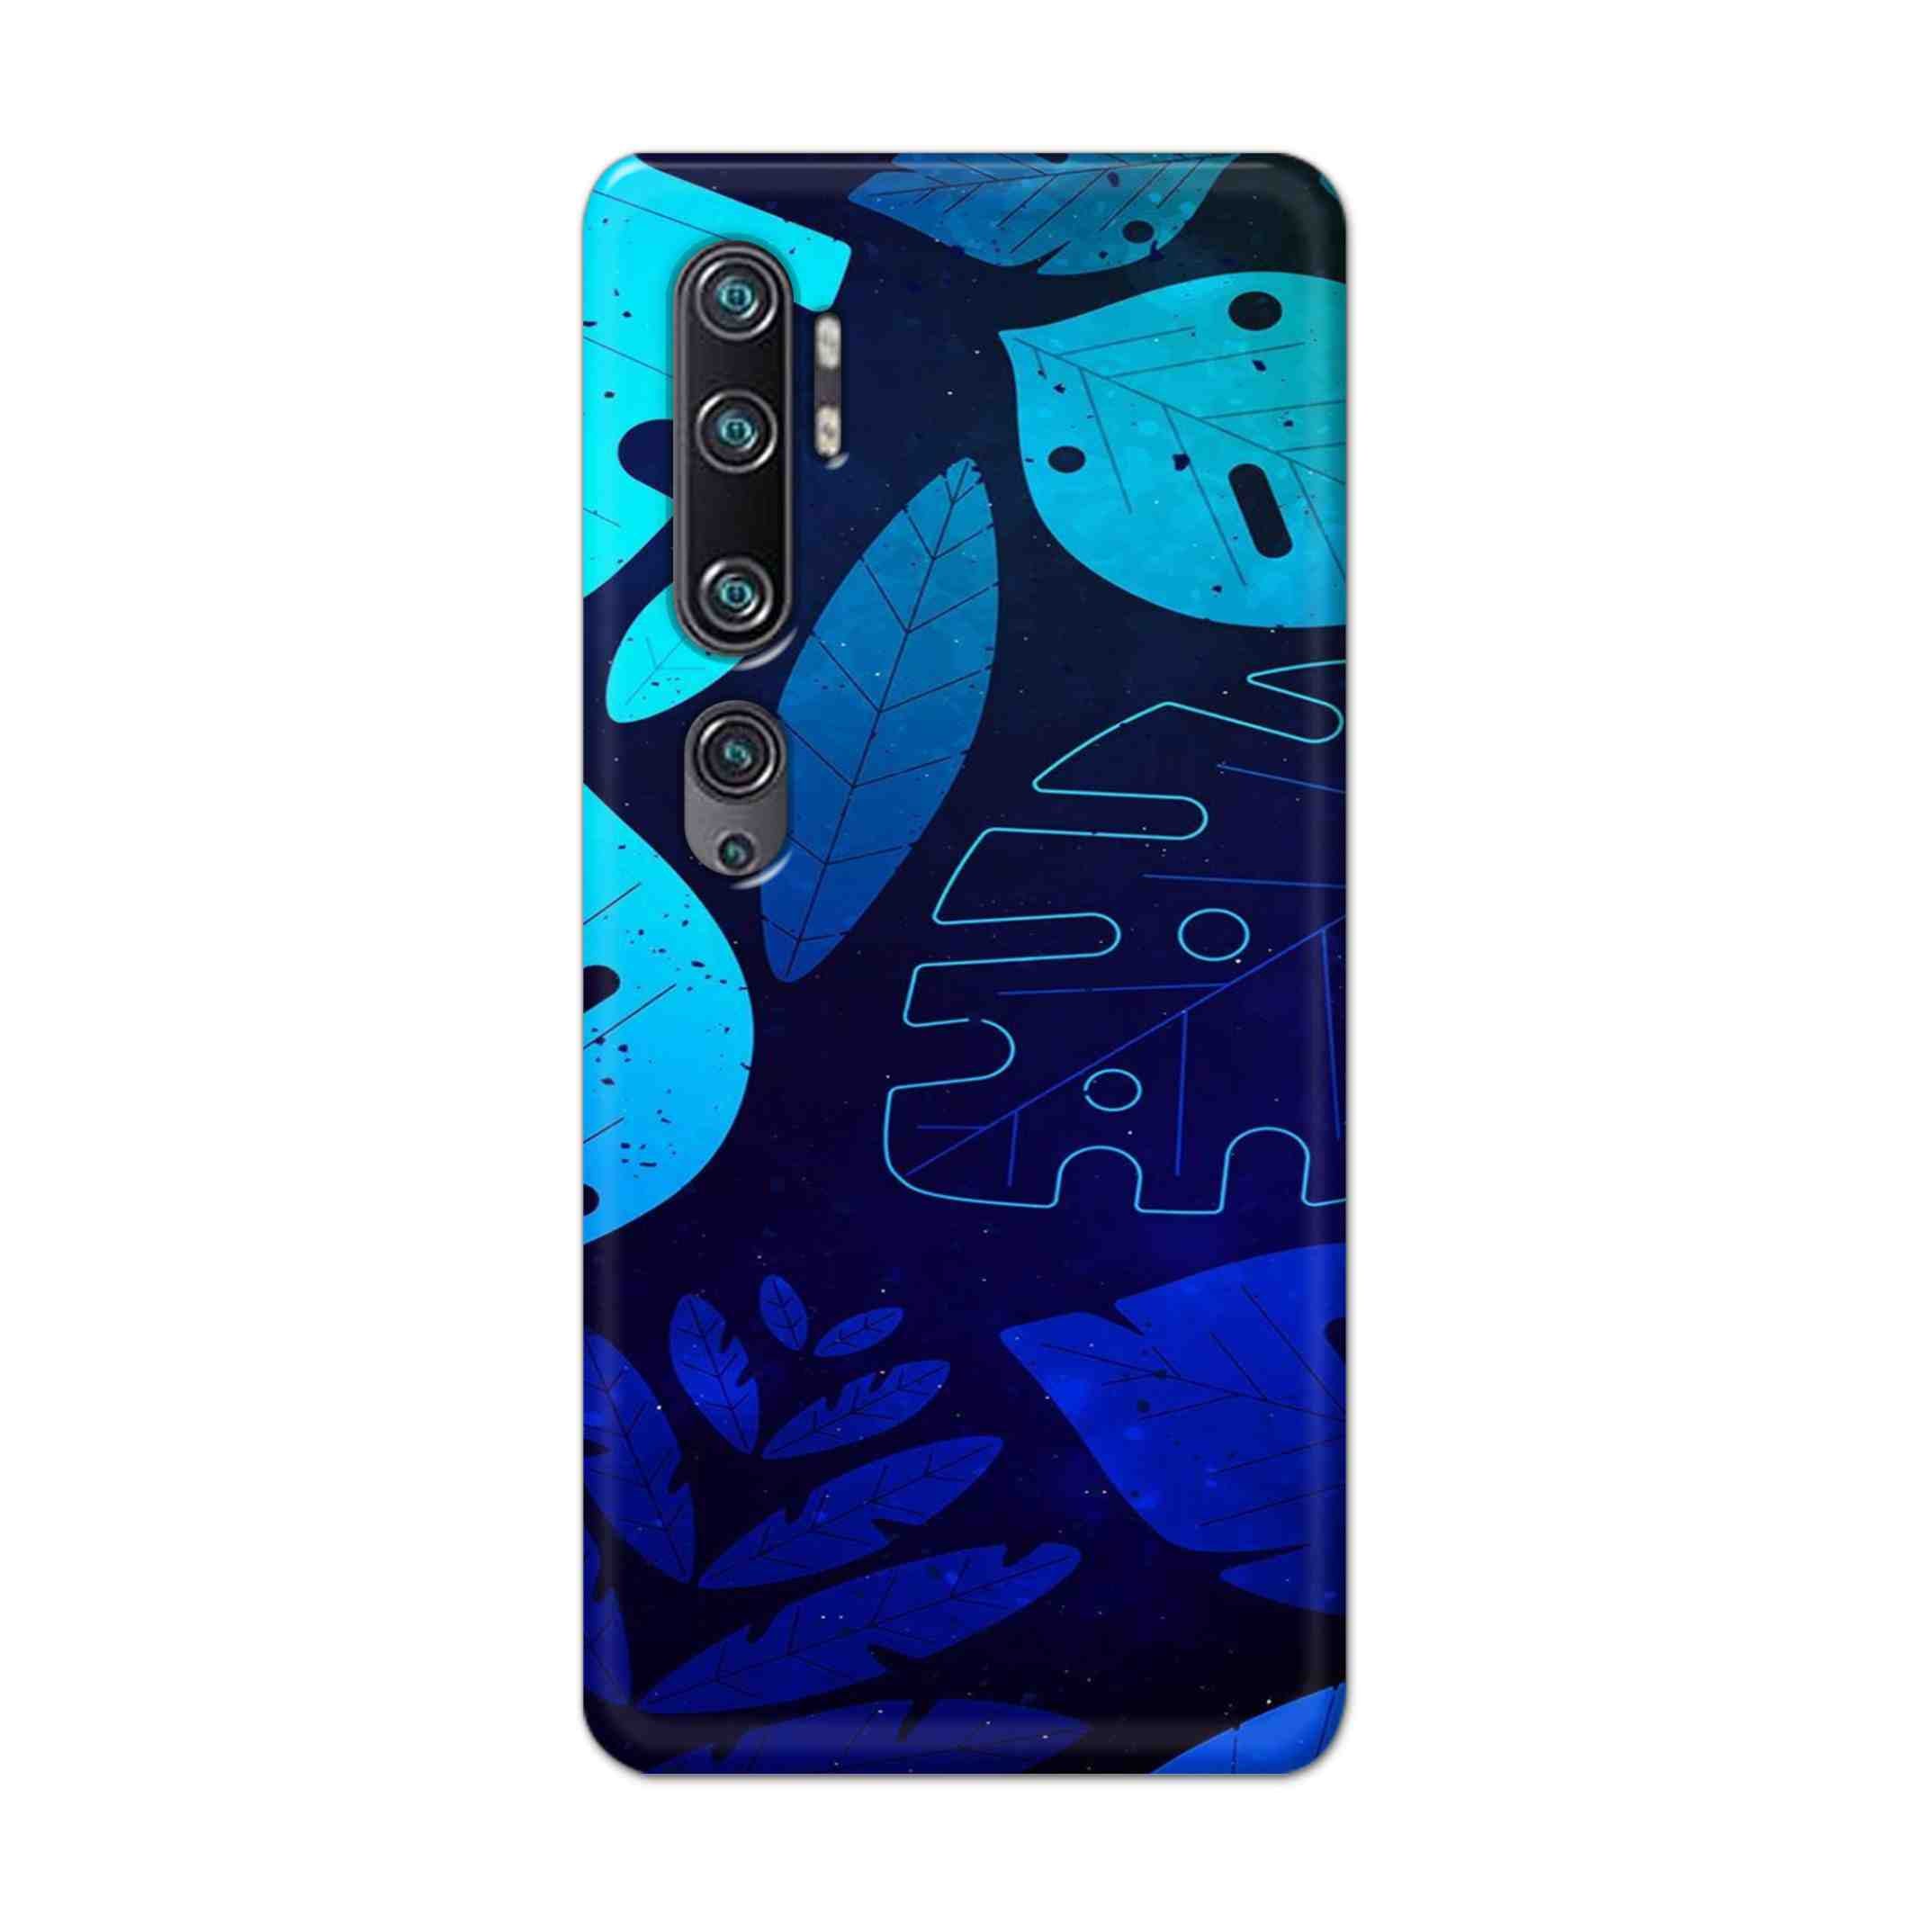 Buy Neon Leaf Hard Back Mobile Phone Case Cover For Xiaomi Mi Note 10 Online